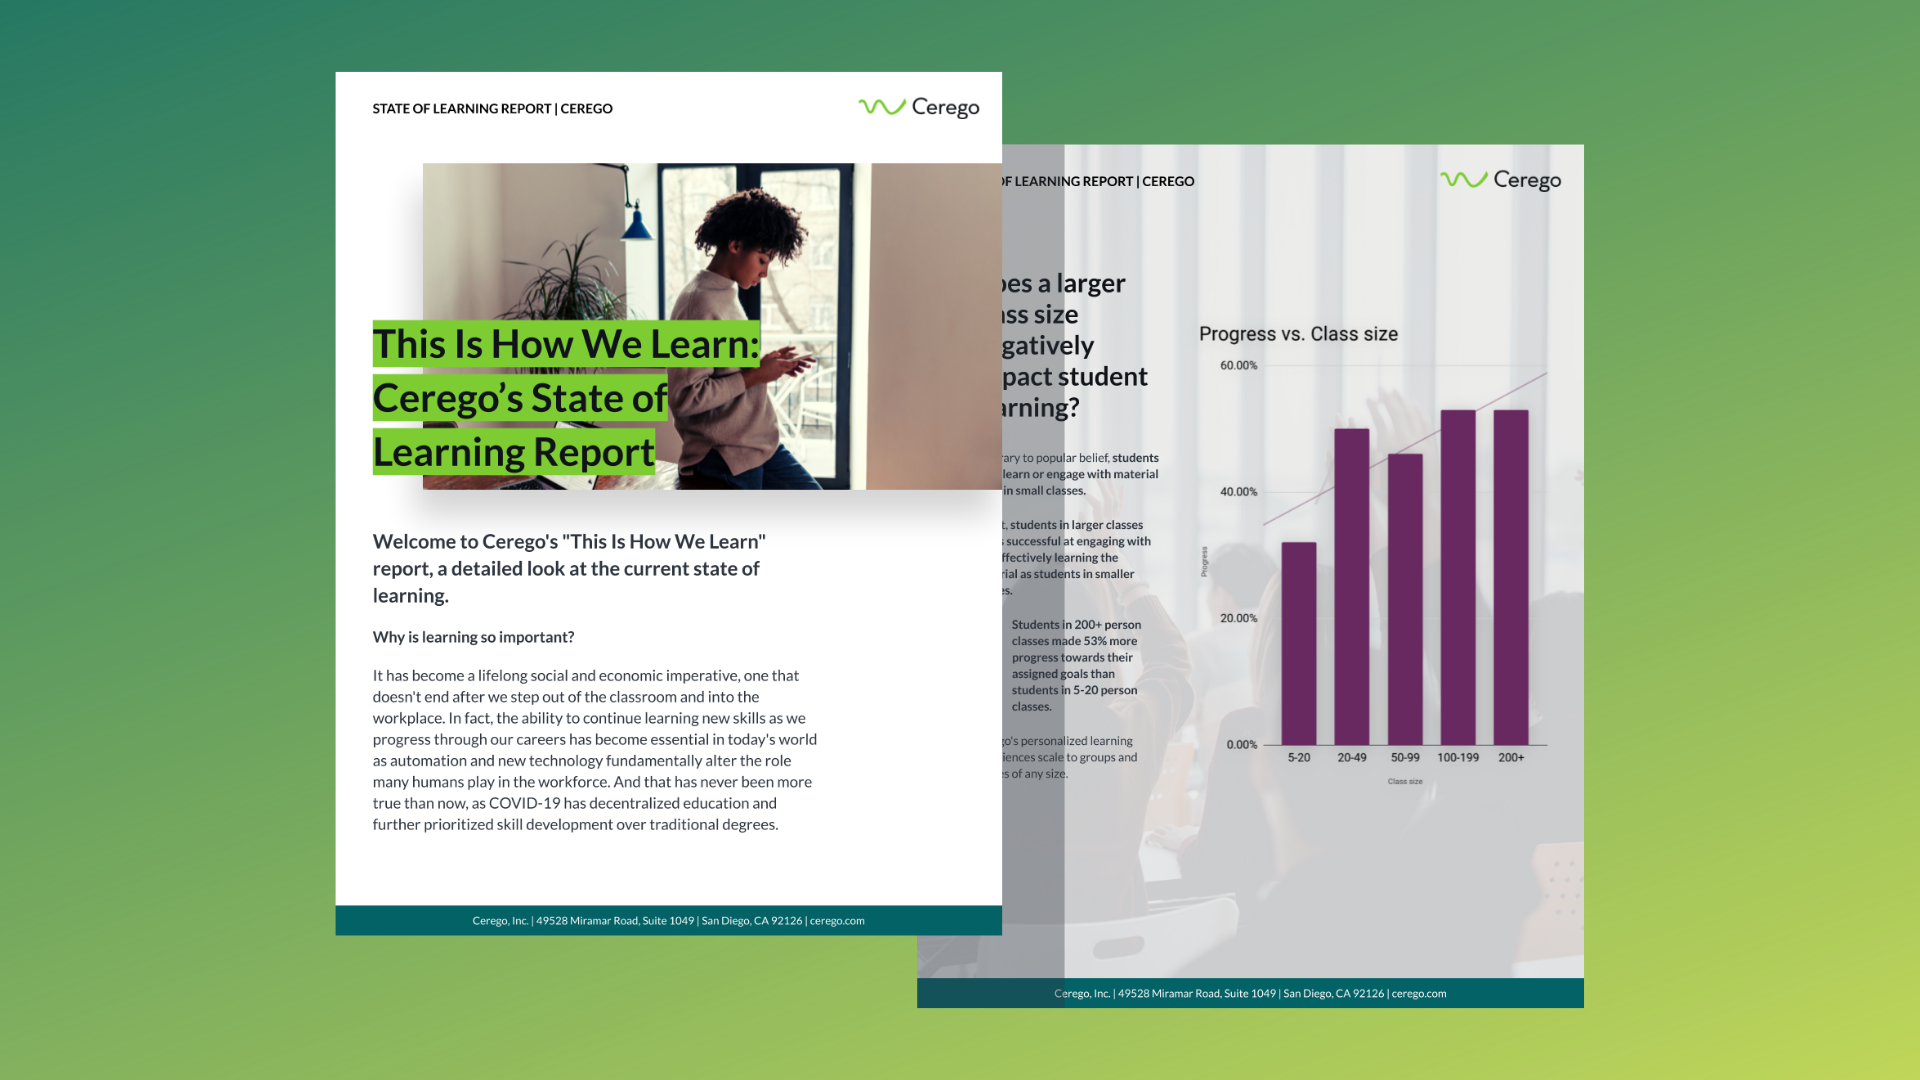 Cerego's State of Learning Report